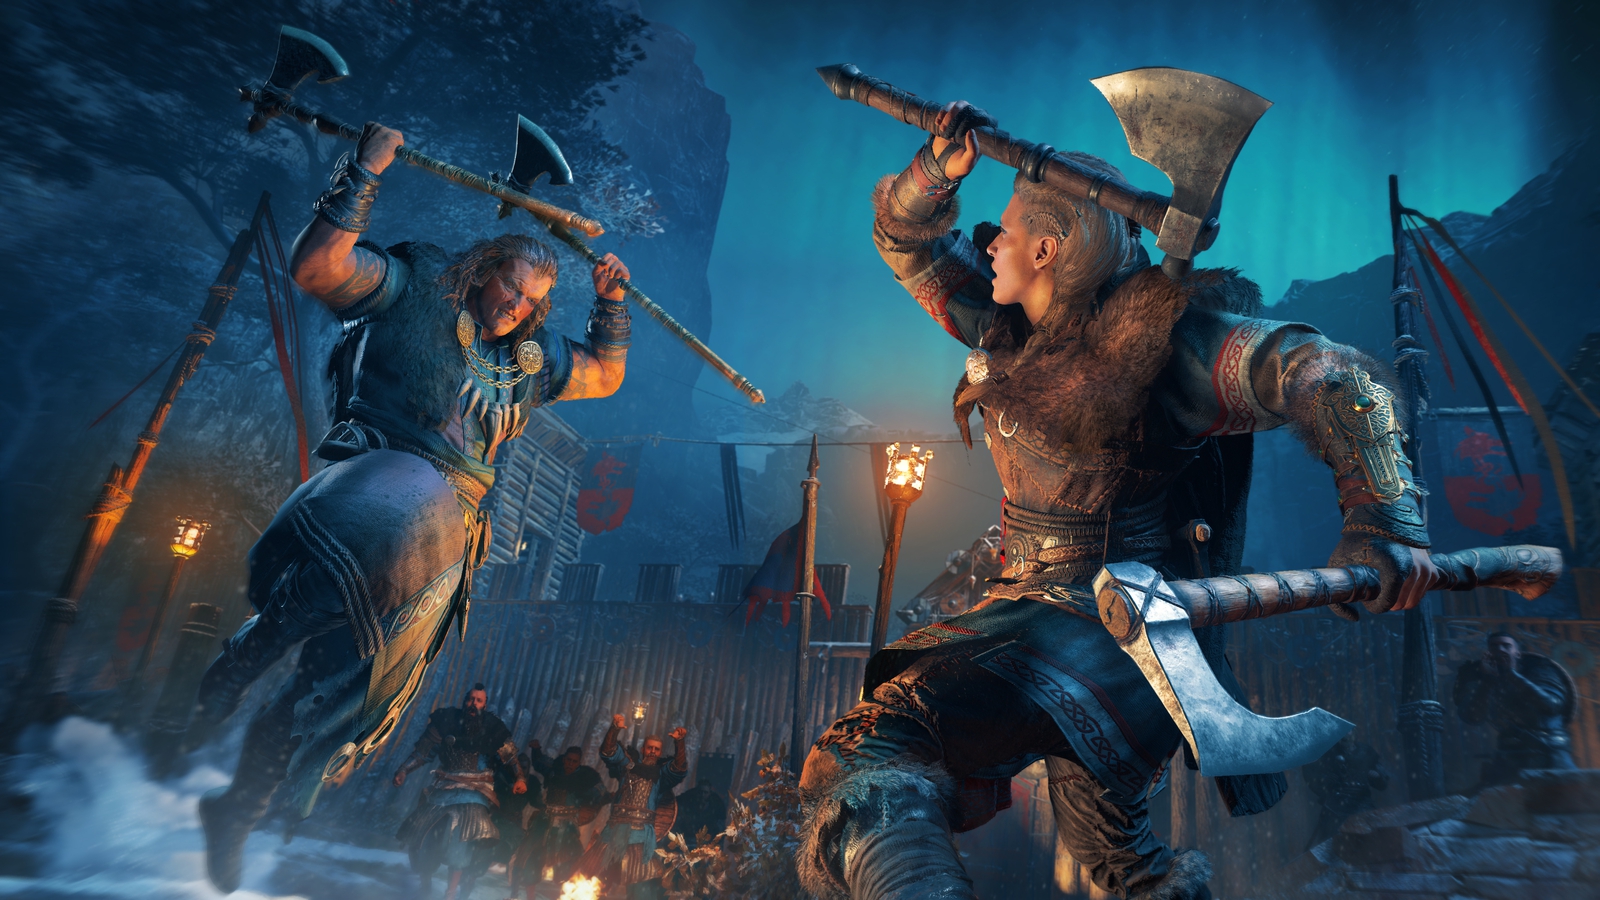 Assassin's Creed Valhalla Explores the Age of Vikings - Xbox Wire